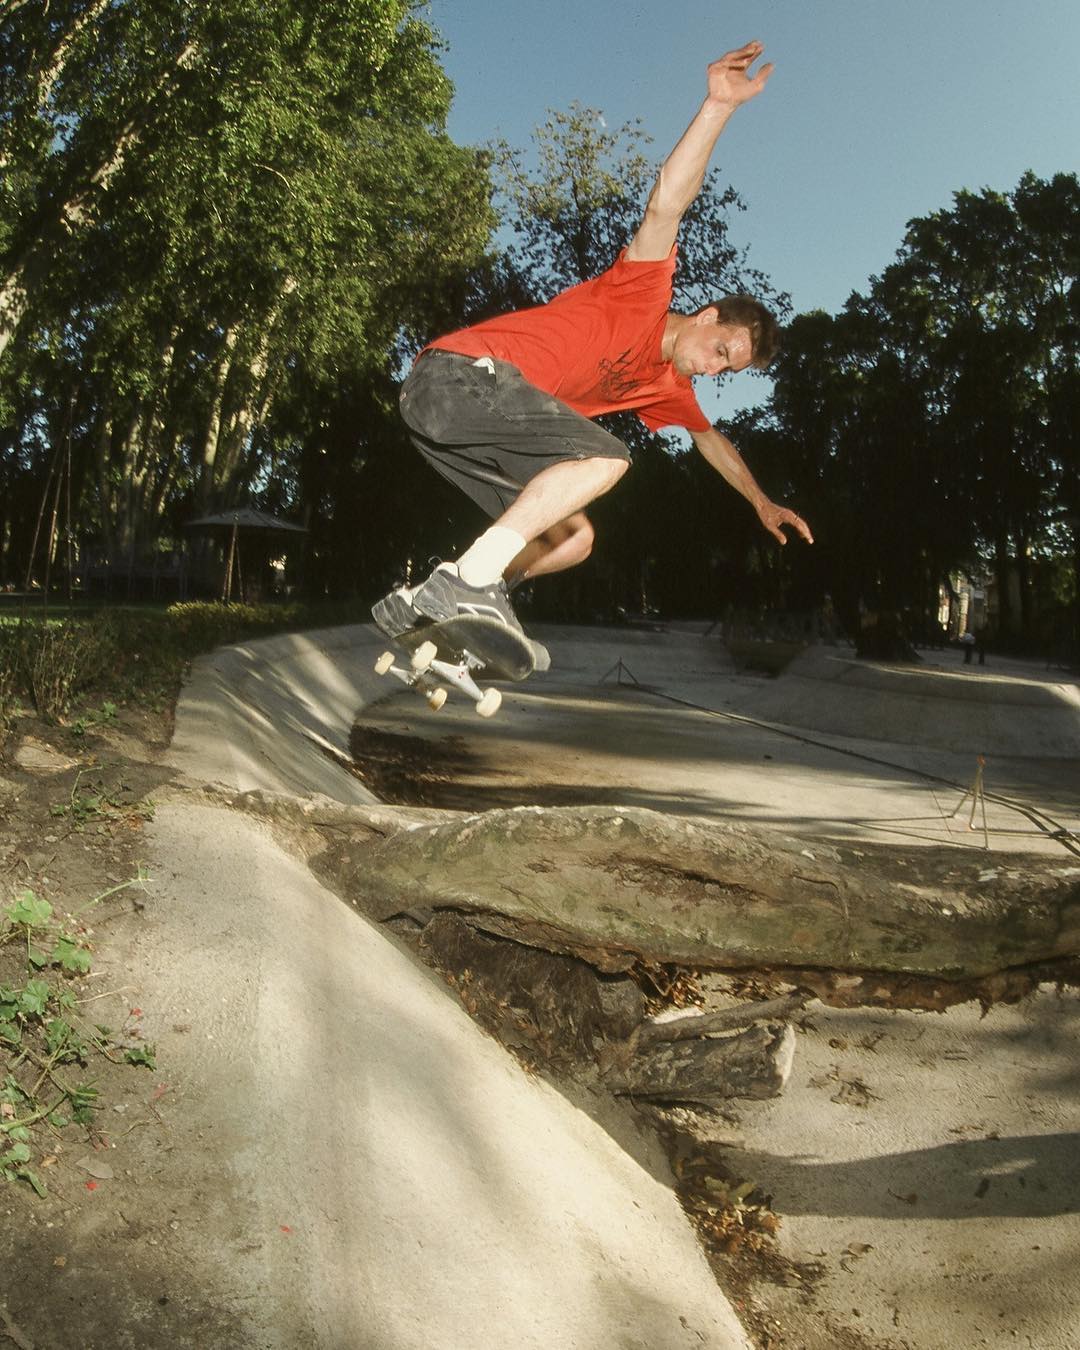 #flashbackfriday on tour through southern France and Spain ca. 2003, we discovered this pont in a park in Perpinon and Westermann found some good lines. Backside ollie over part of a tree. #ollie #backsideollie #jtair #skateboarding #concrete #duckpont #bailgun #gerdriegerphotography